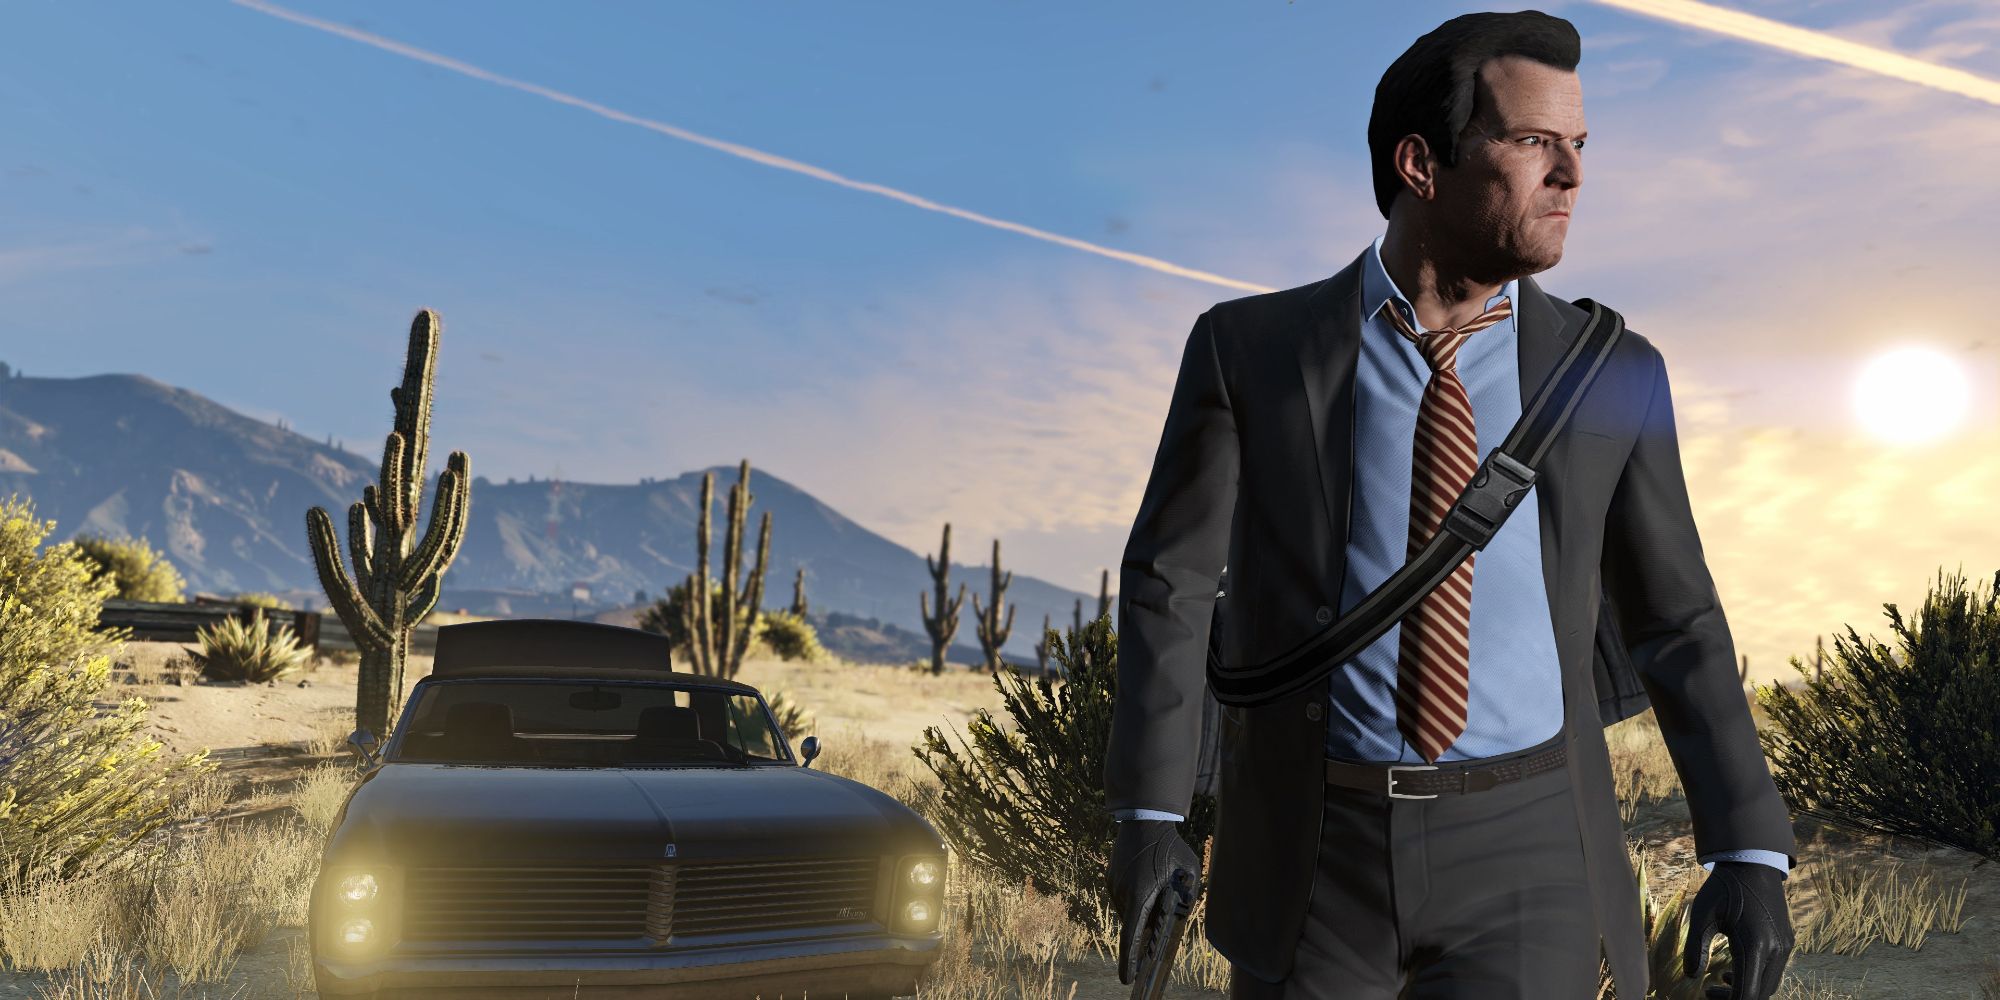 Grand Theft Auto 5's Michael standing next to a car